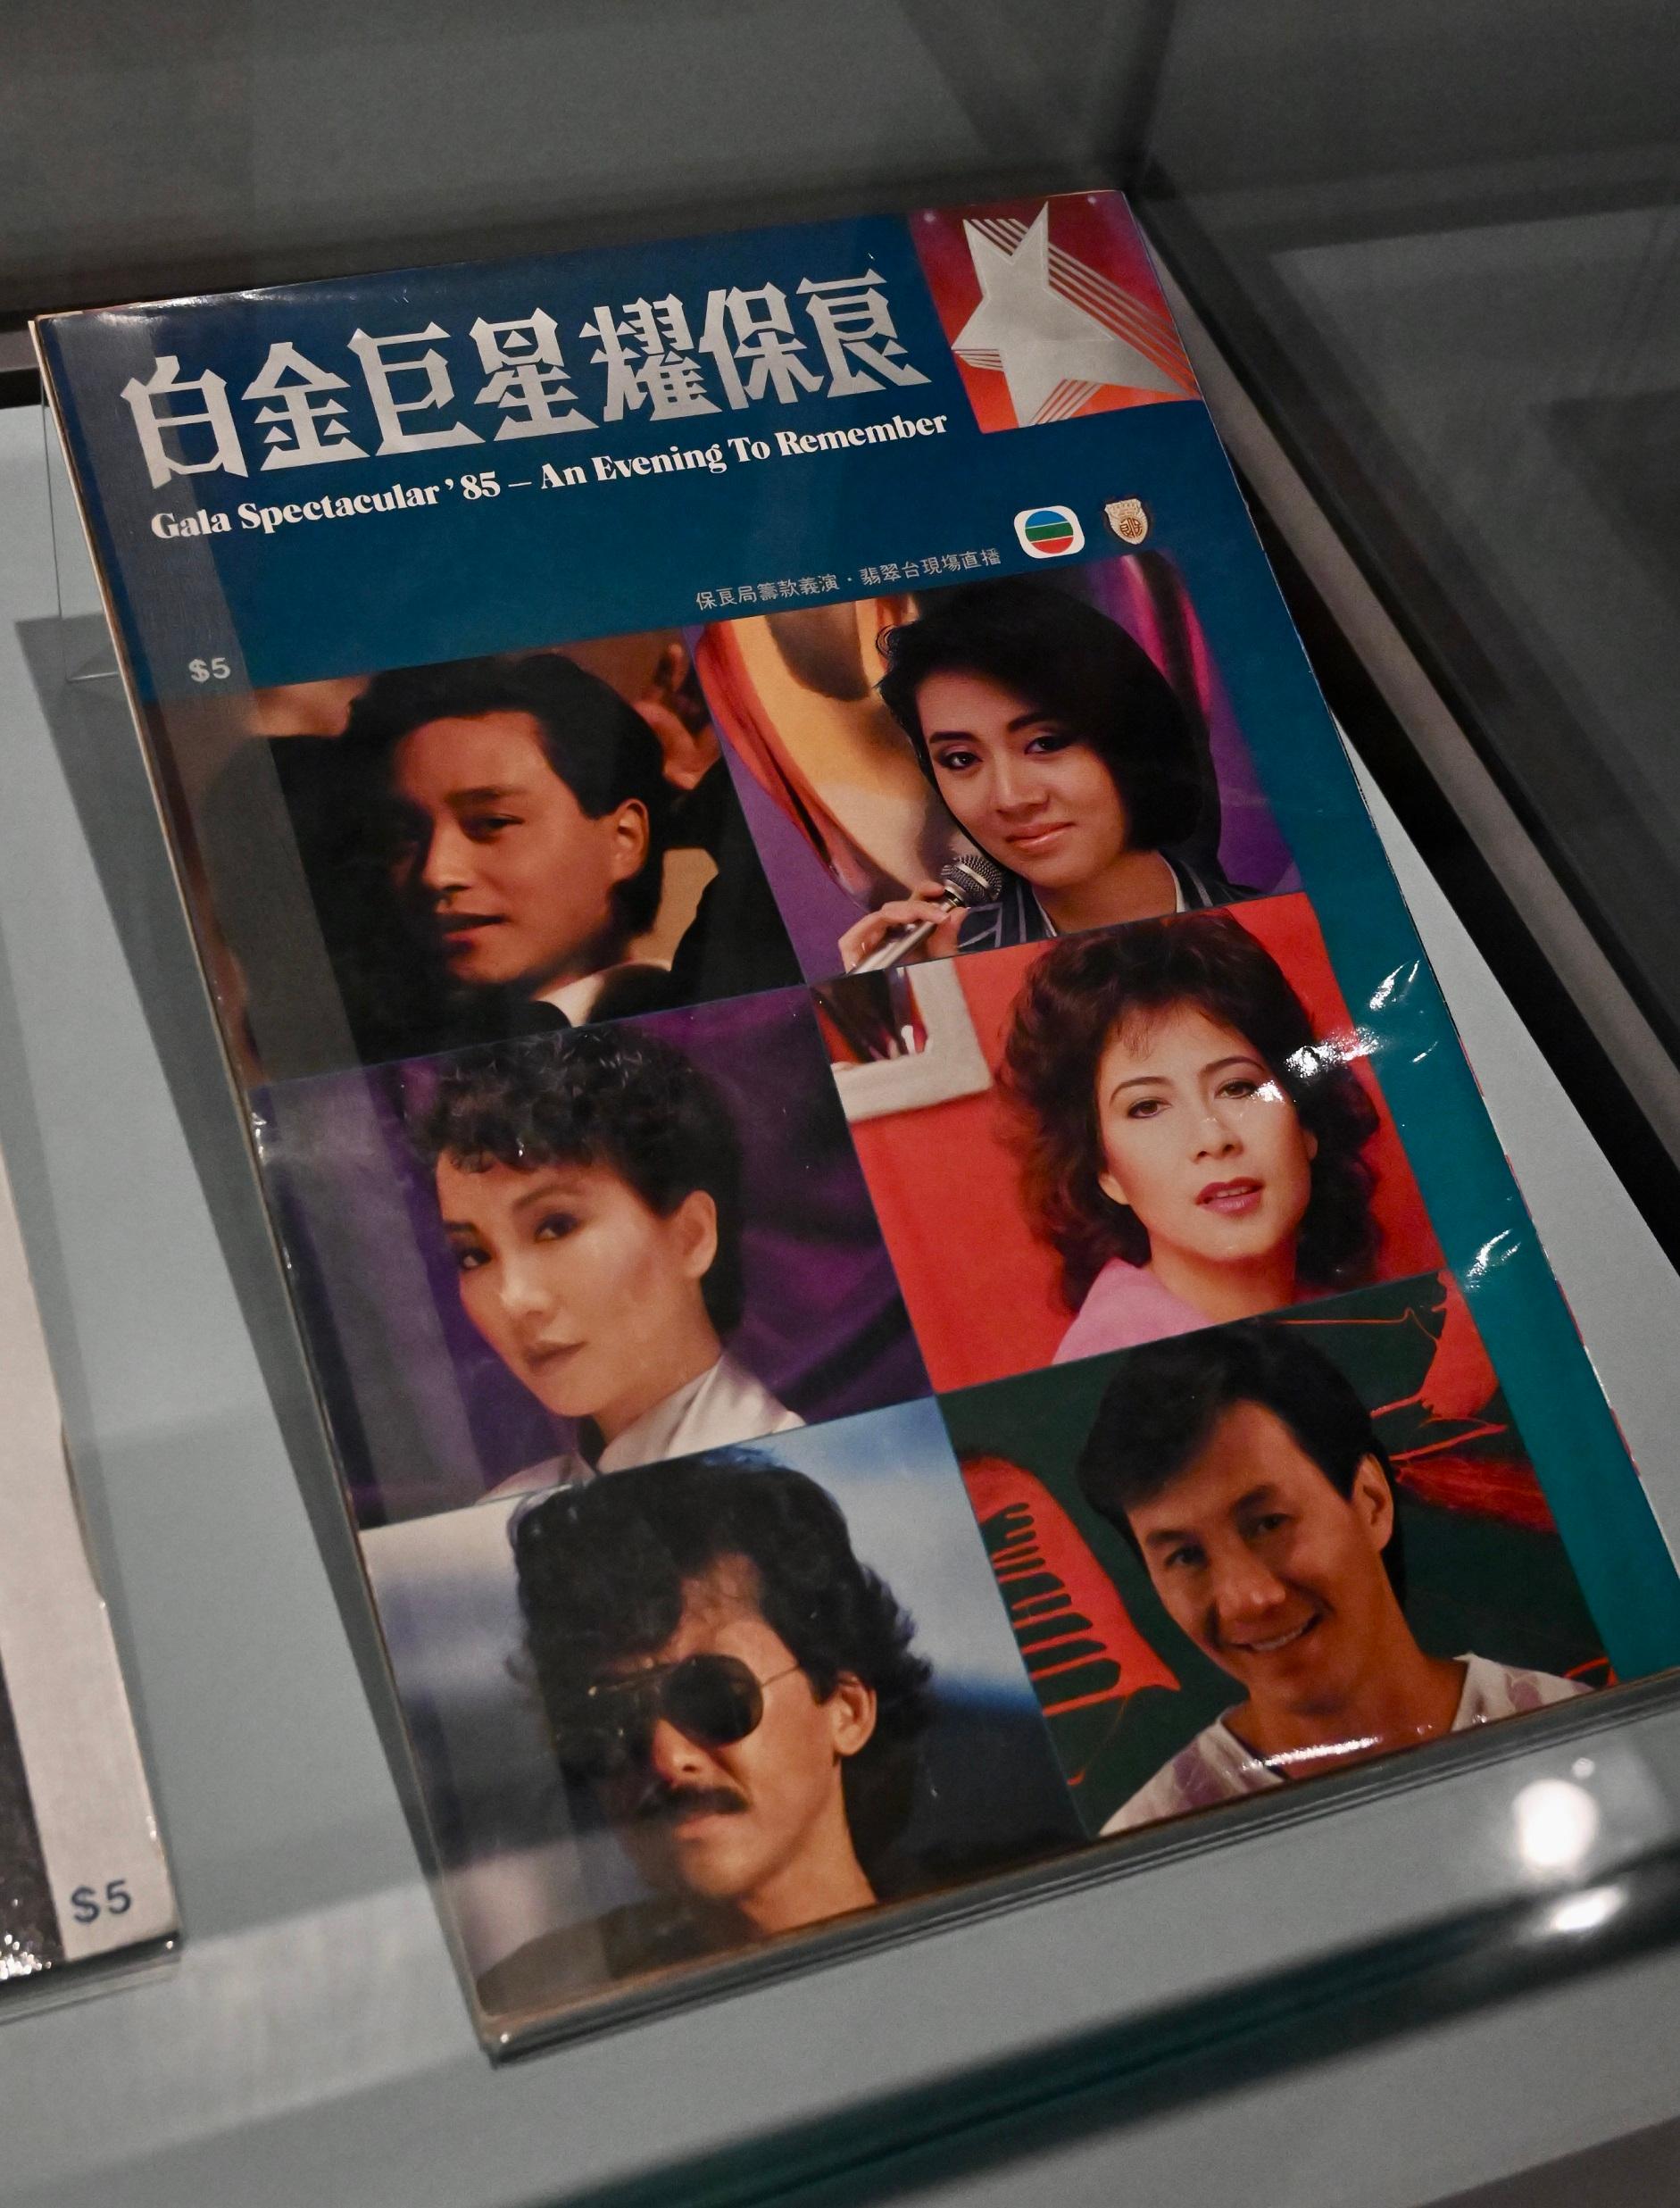 The opening ceremony for the exhibition "Po Leung Kuk 145th Anniversary: Building Charity with Benevolence" was held today (October 17) at the Hong Kong Heritage Museum. Photo shows a brochure of "Gala Spectacular - An Evening To Remember" in 1985.
